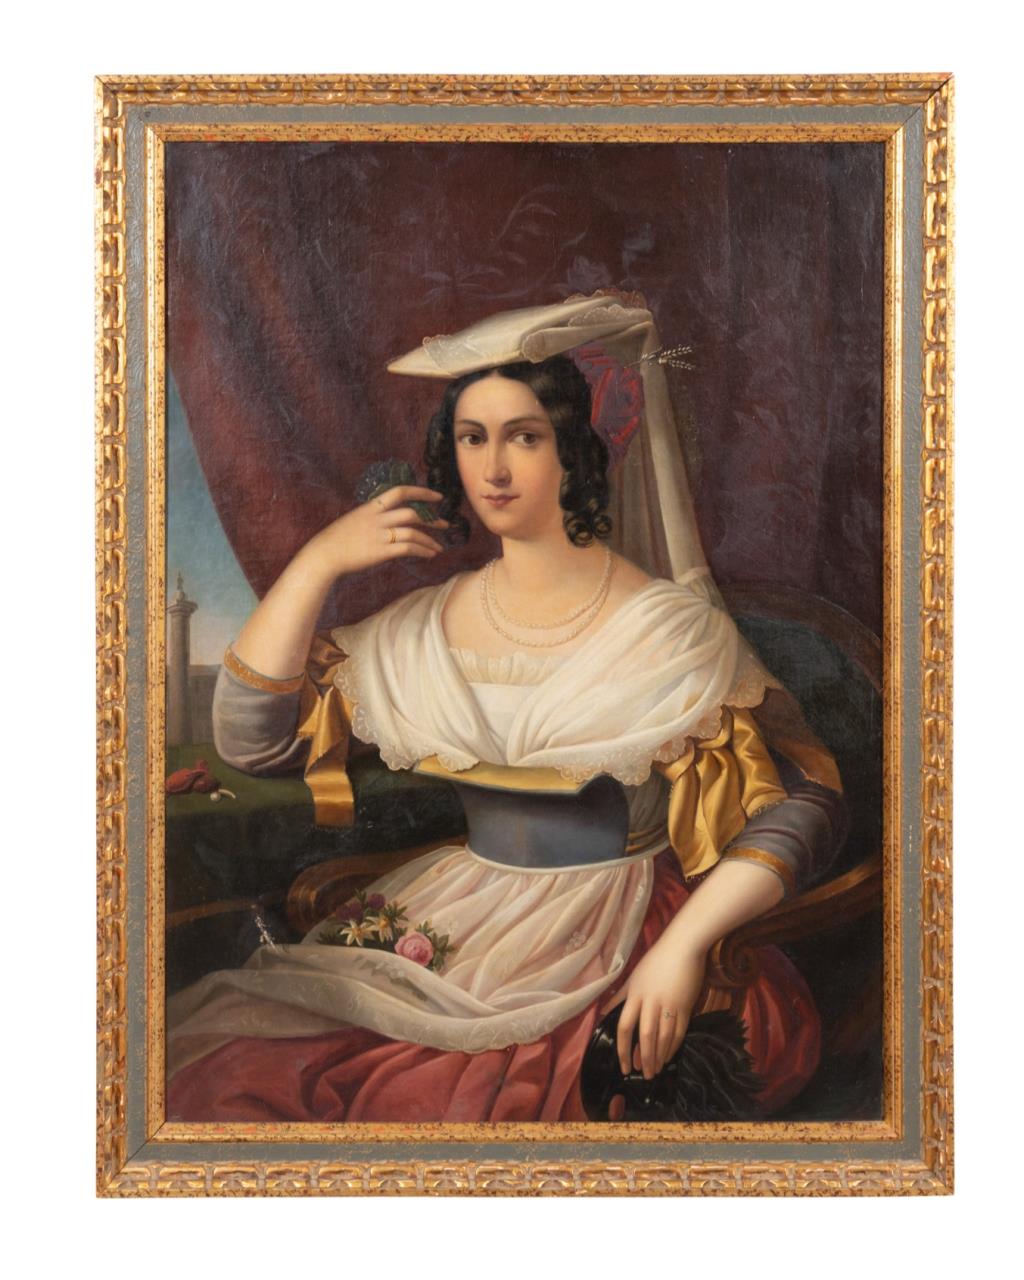 19TH C PORTRAIT OF A WOMAN FROM 2f9985